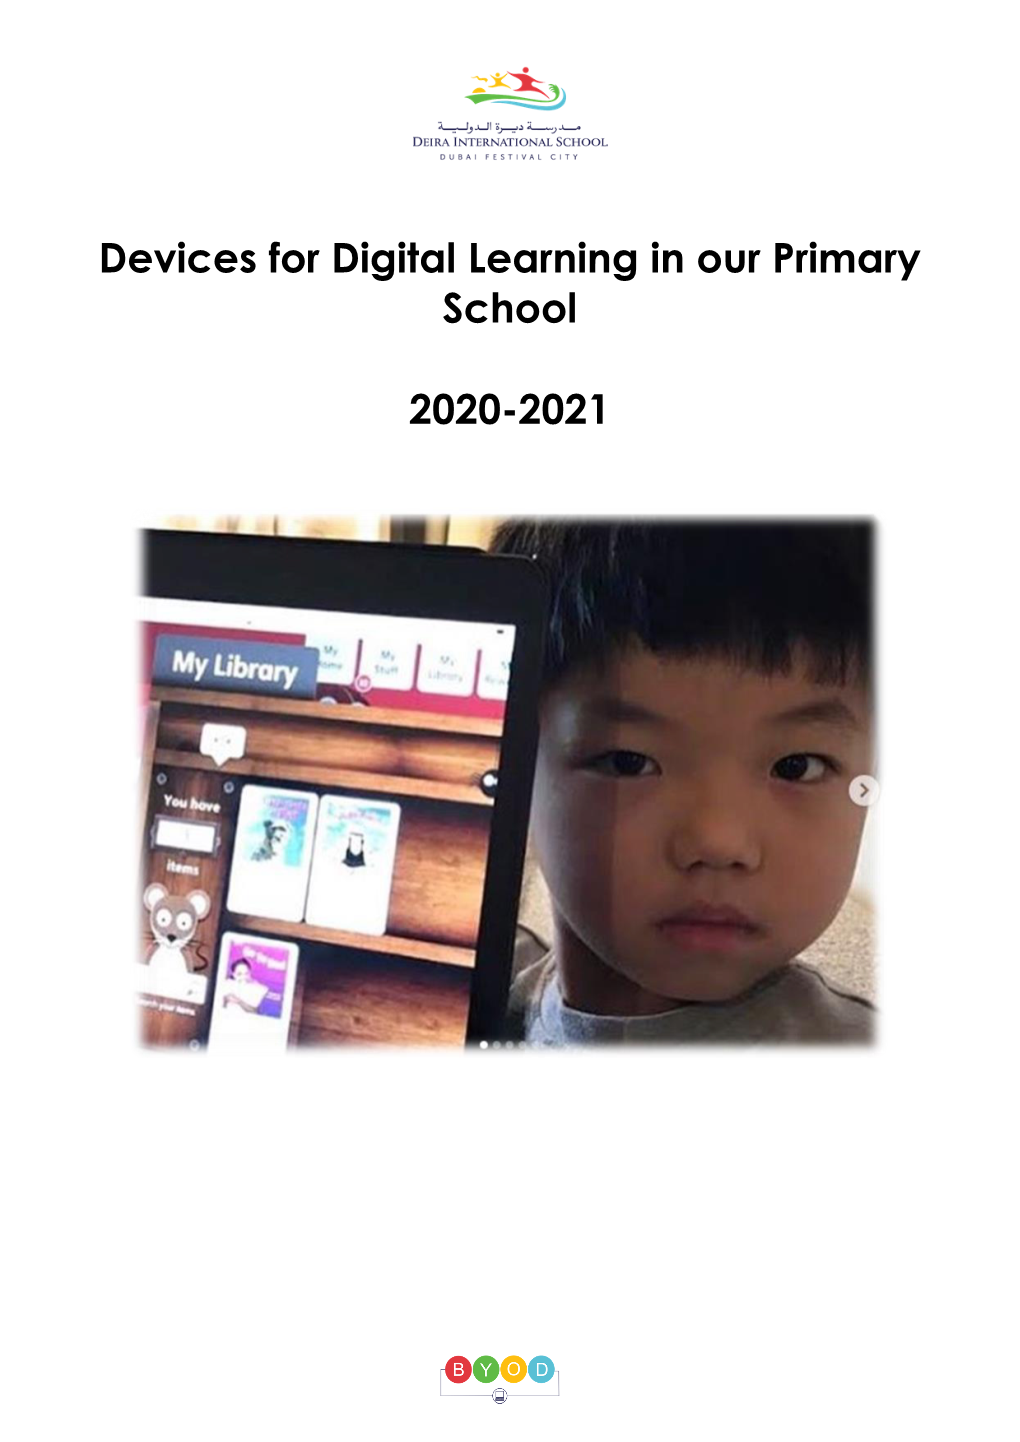 Devices for Digital Learning in Our Secondary School